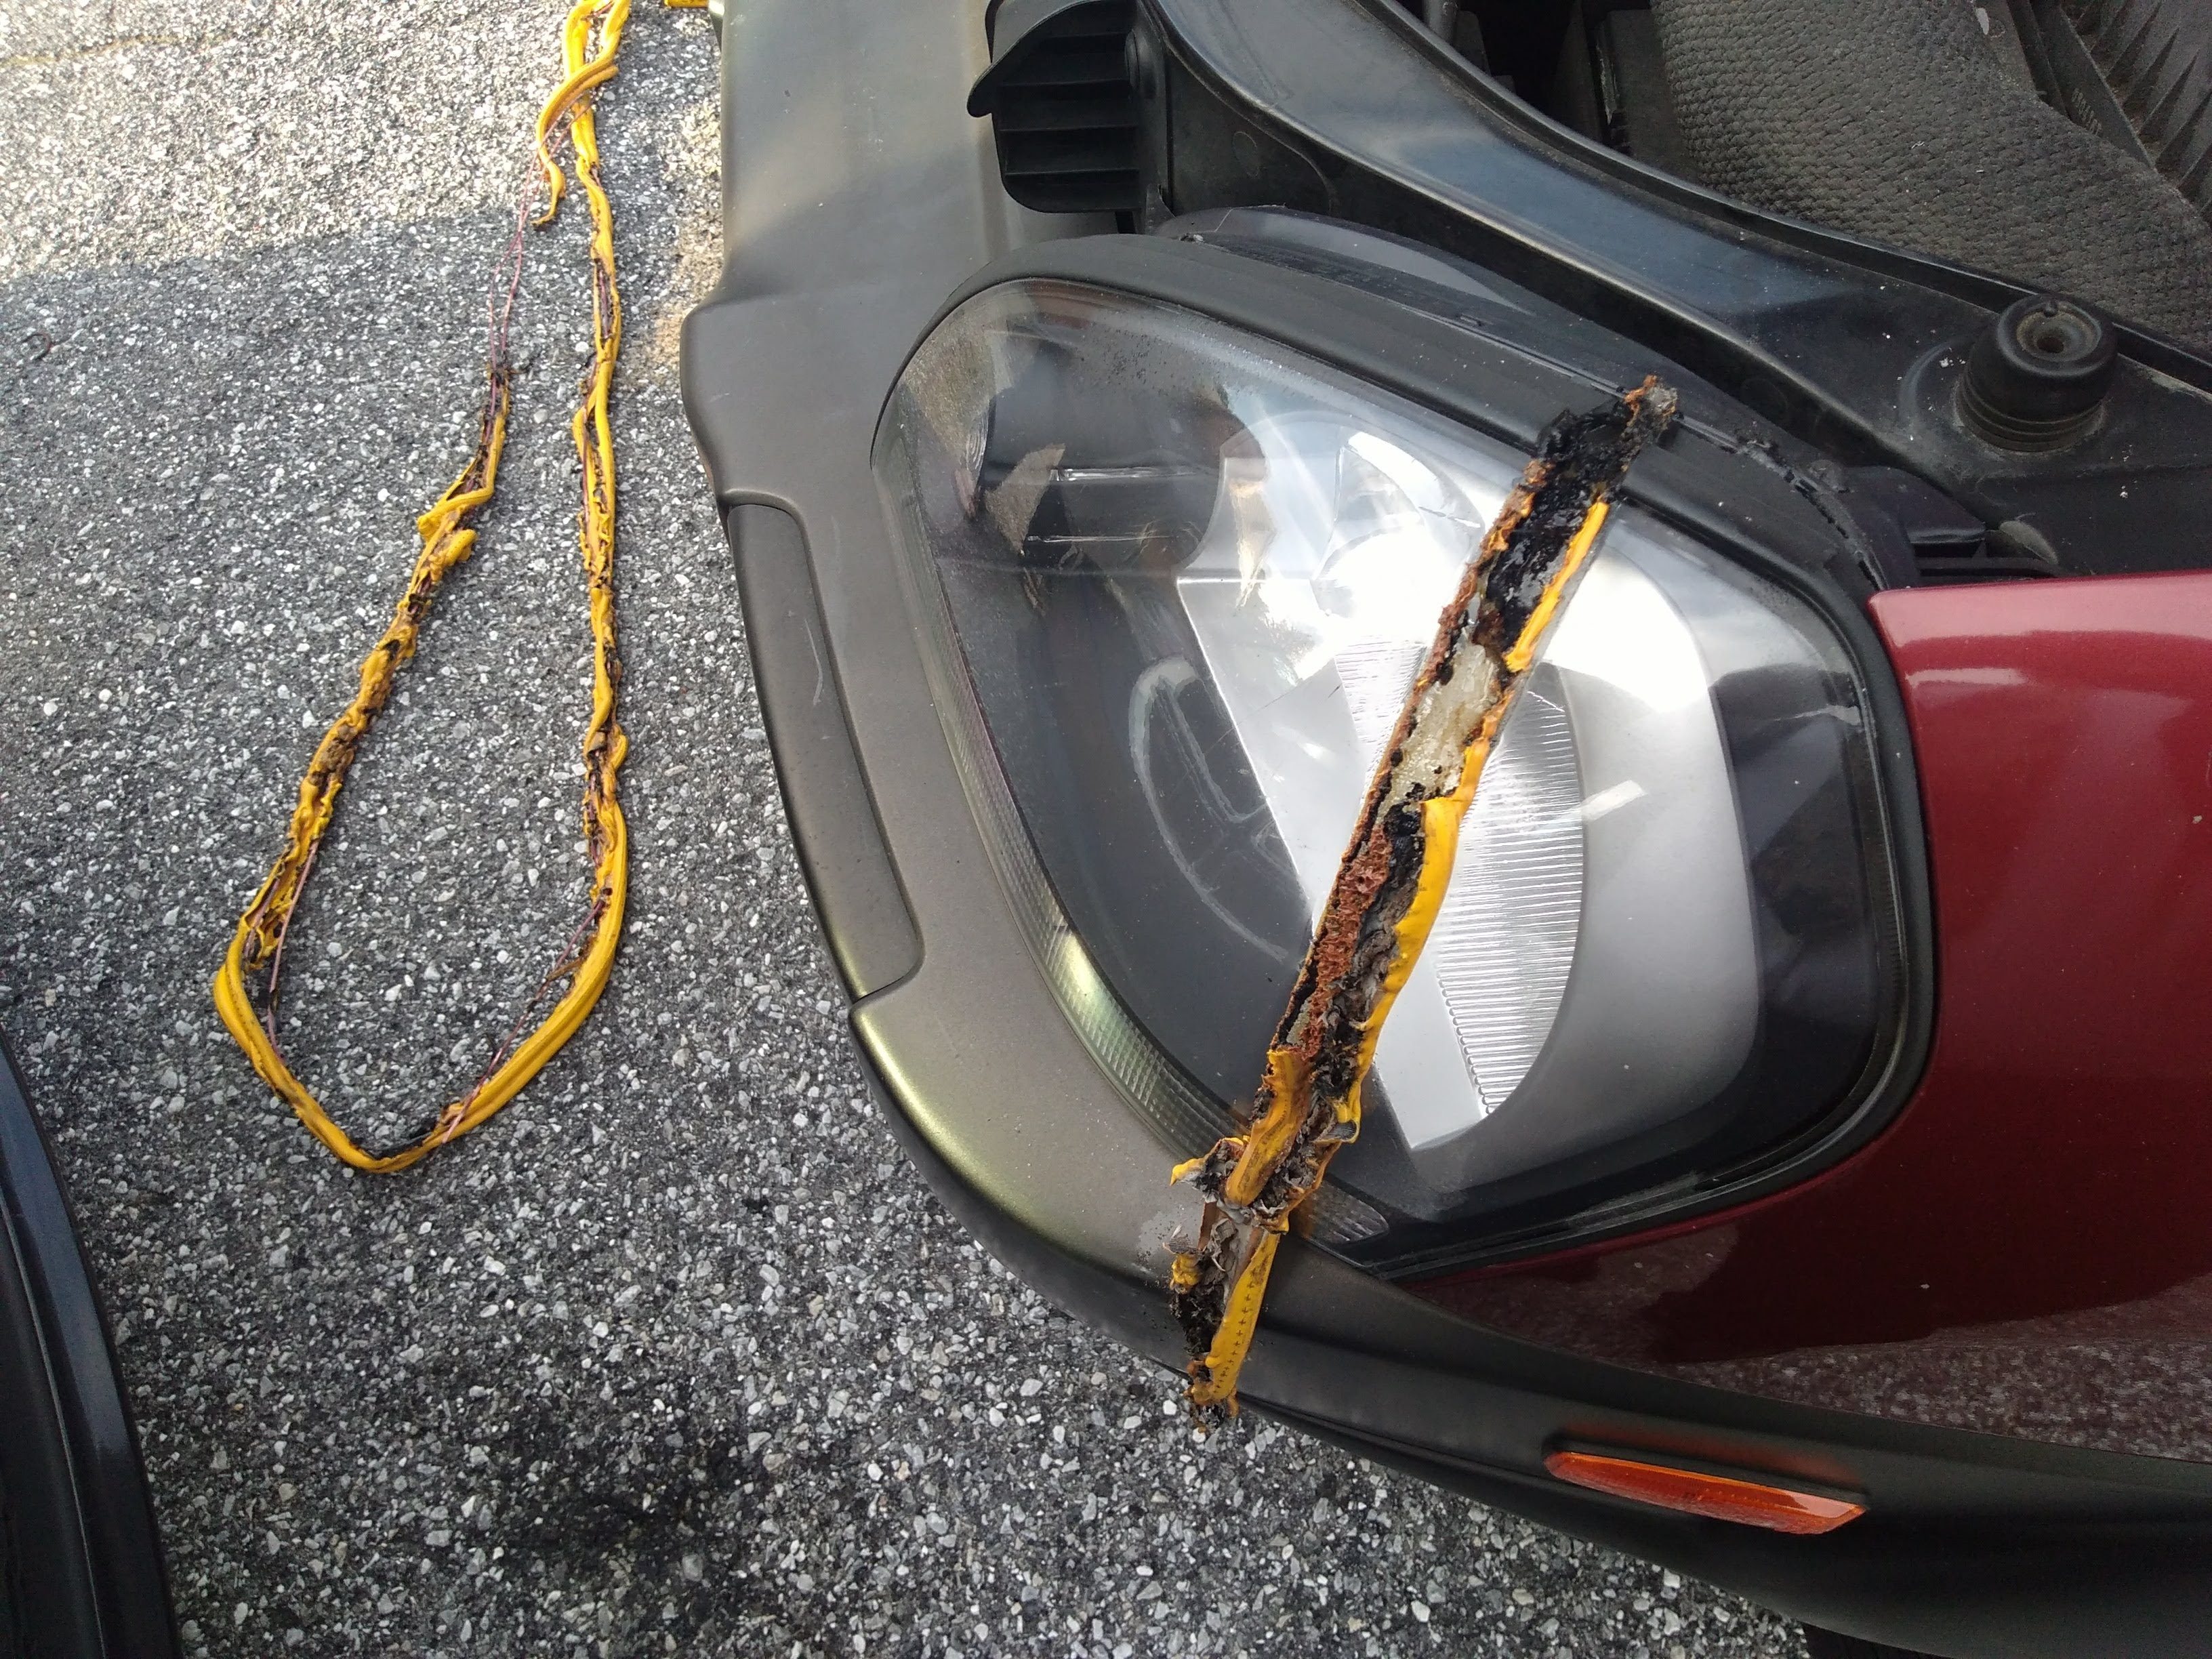 I Accidentally Crossed the Jumper Cables, This Is What Happened